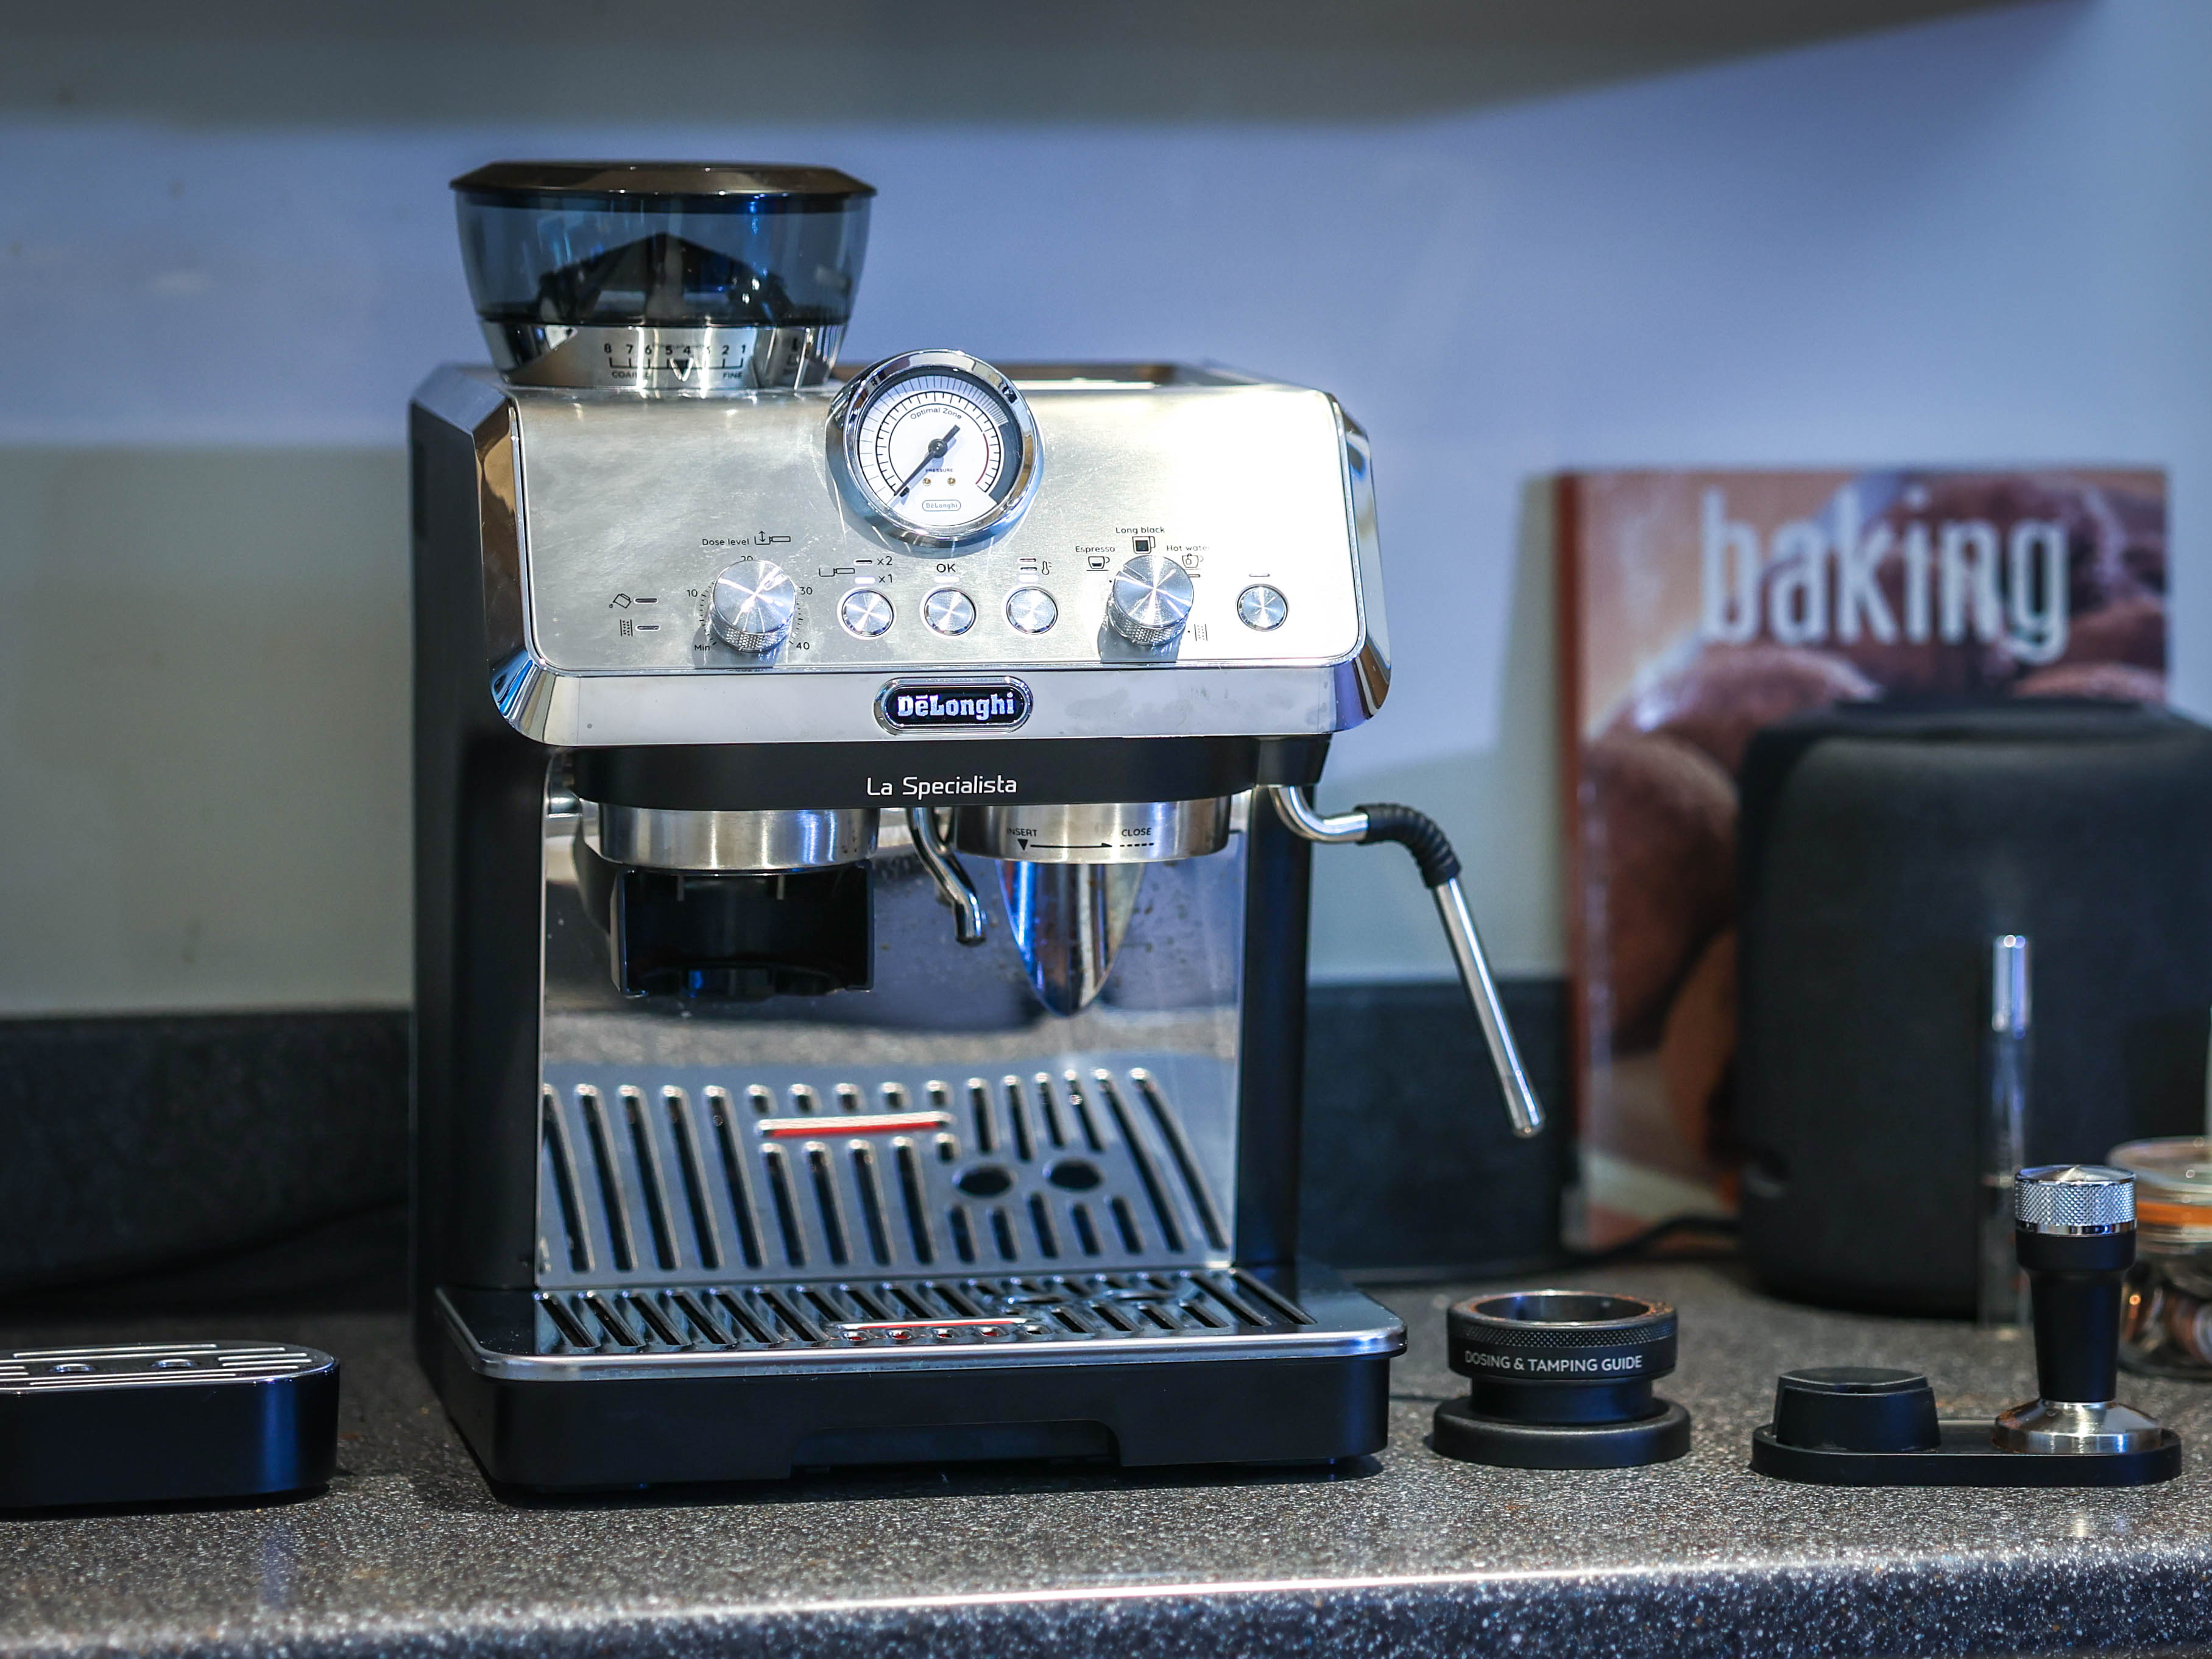 DeLonghi Stainless Steel Manual Espresso Machine at